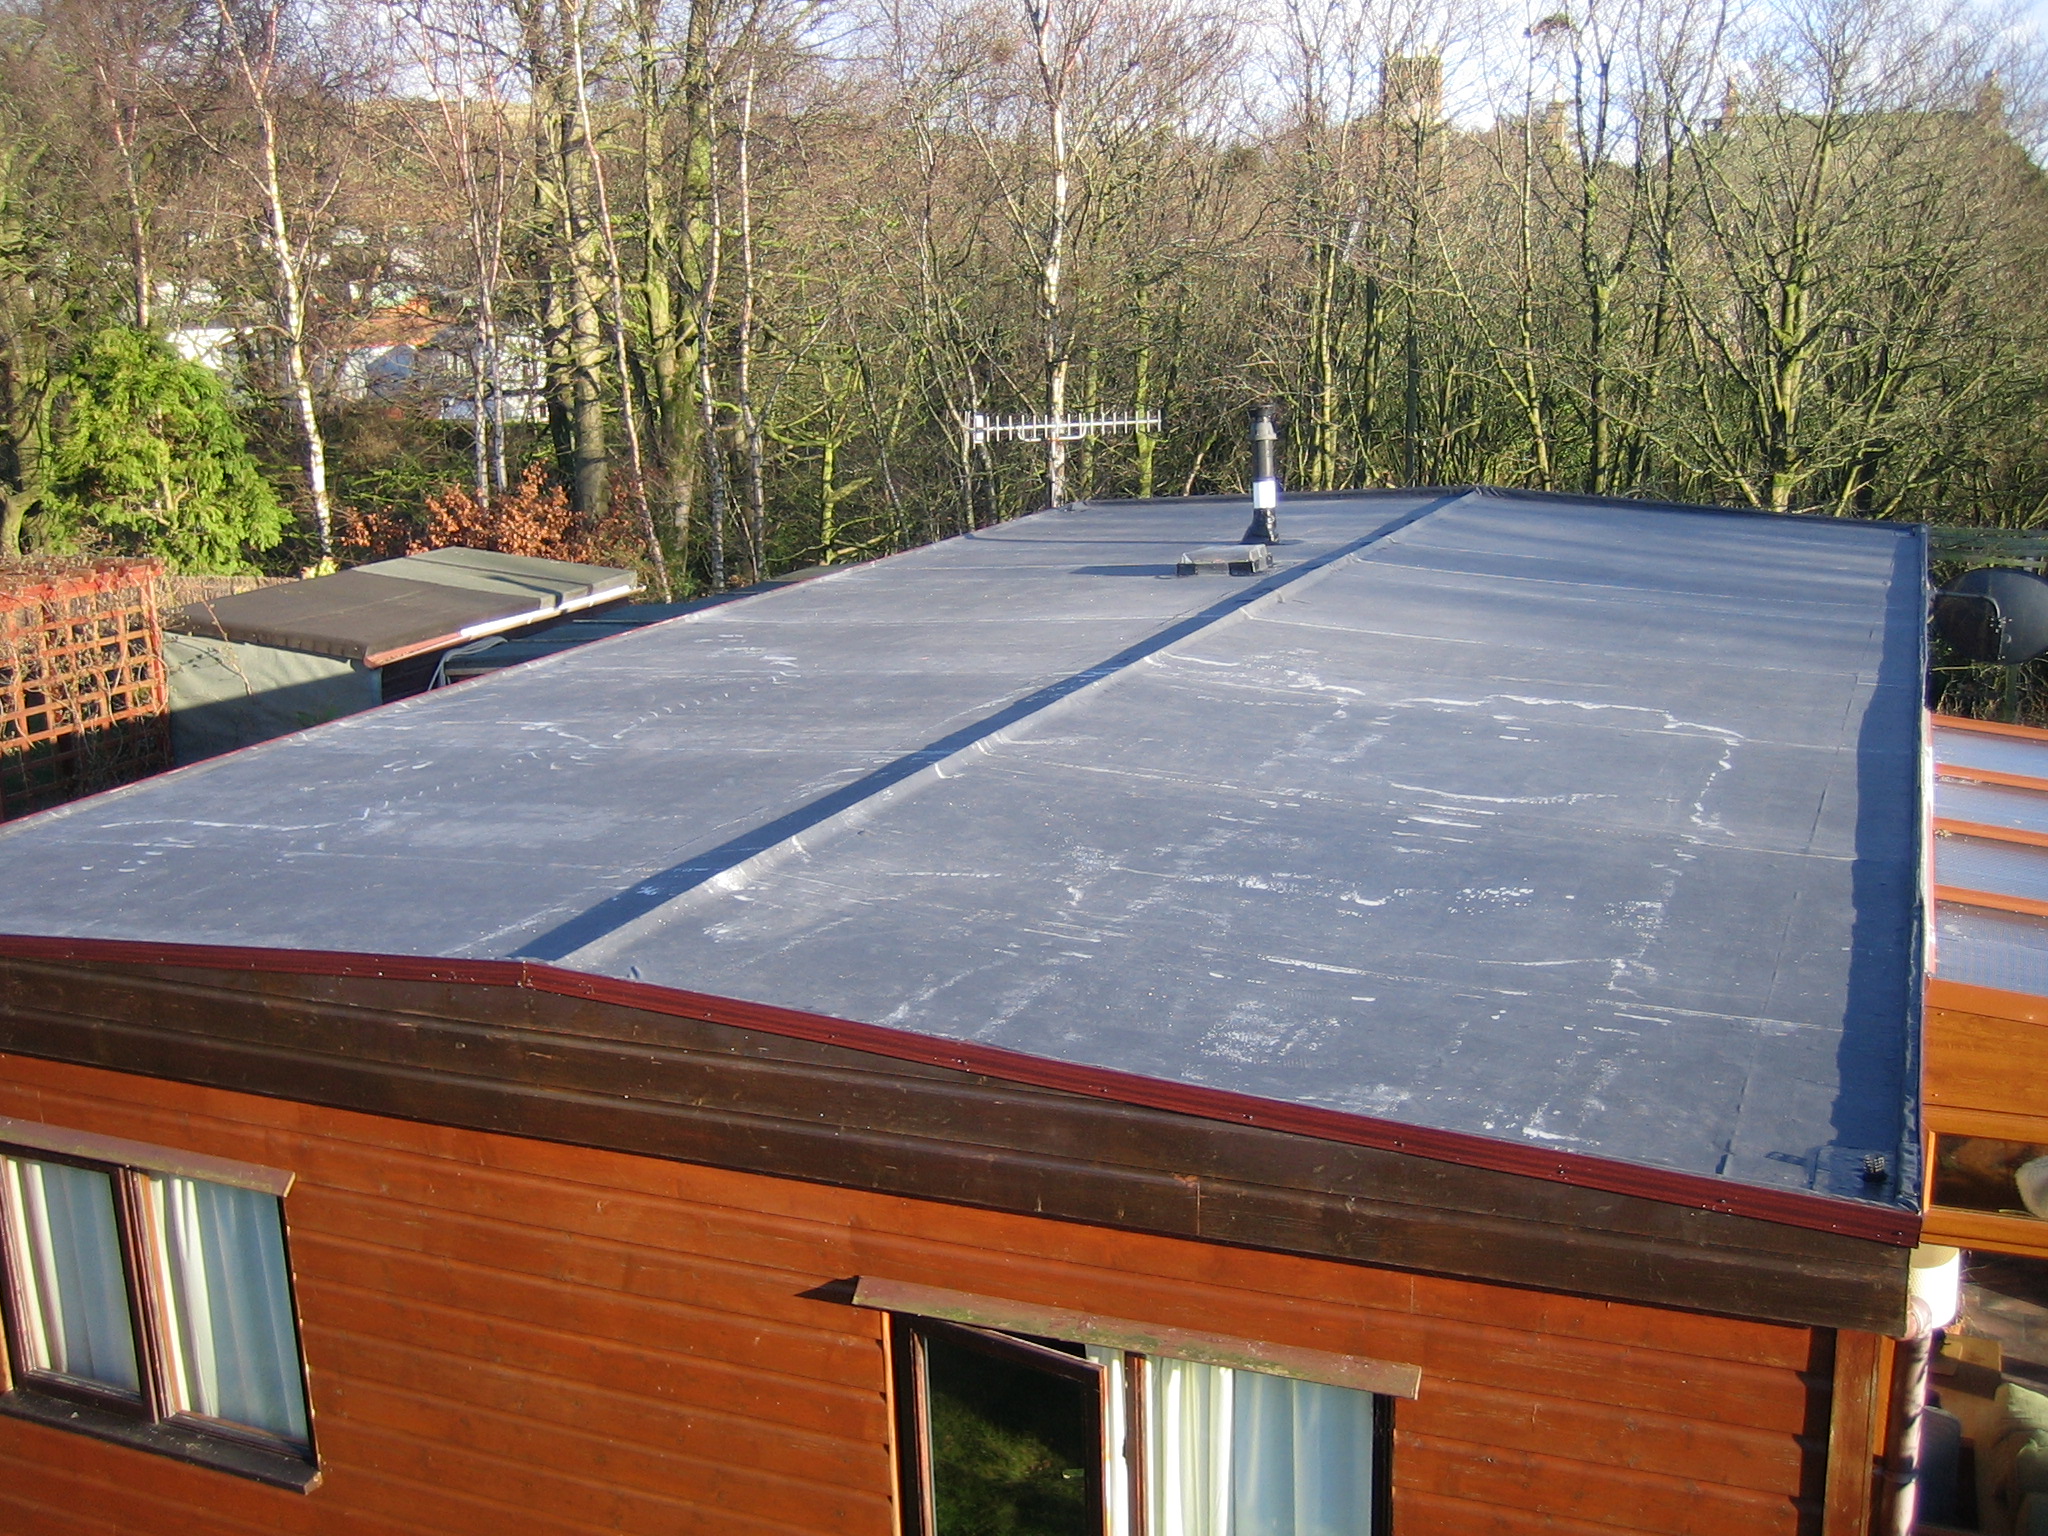 Choosing A Low Slope Roofing Product Commercial Grade Flat Roof